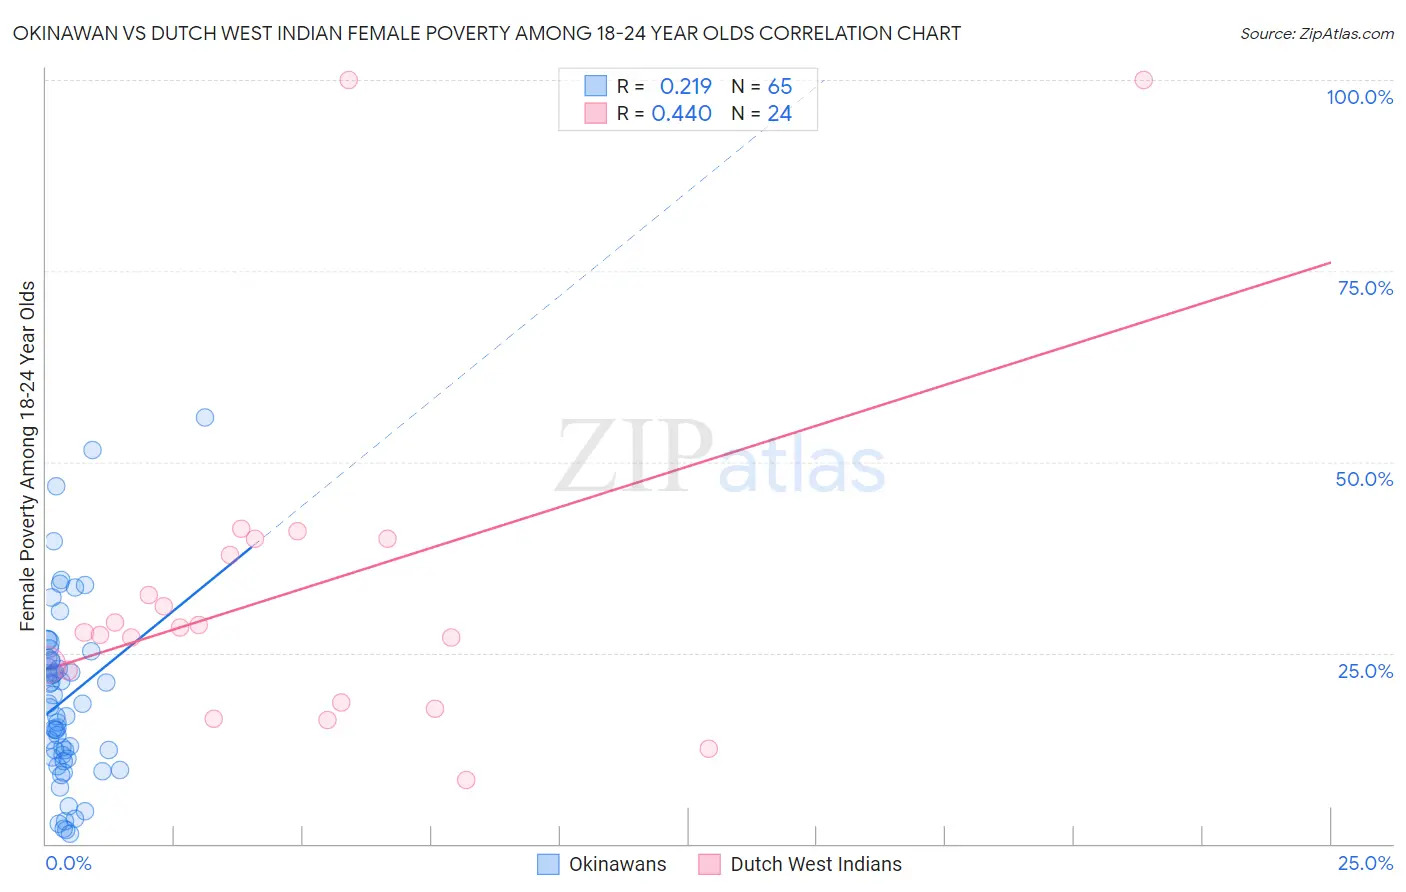 Okinawan vs Dutch West Indian Female Poverty Among 18-24 Year Olds